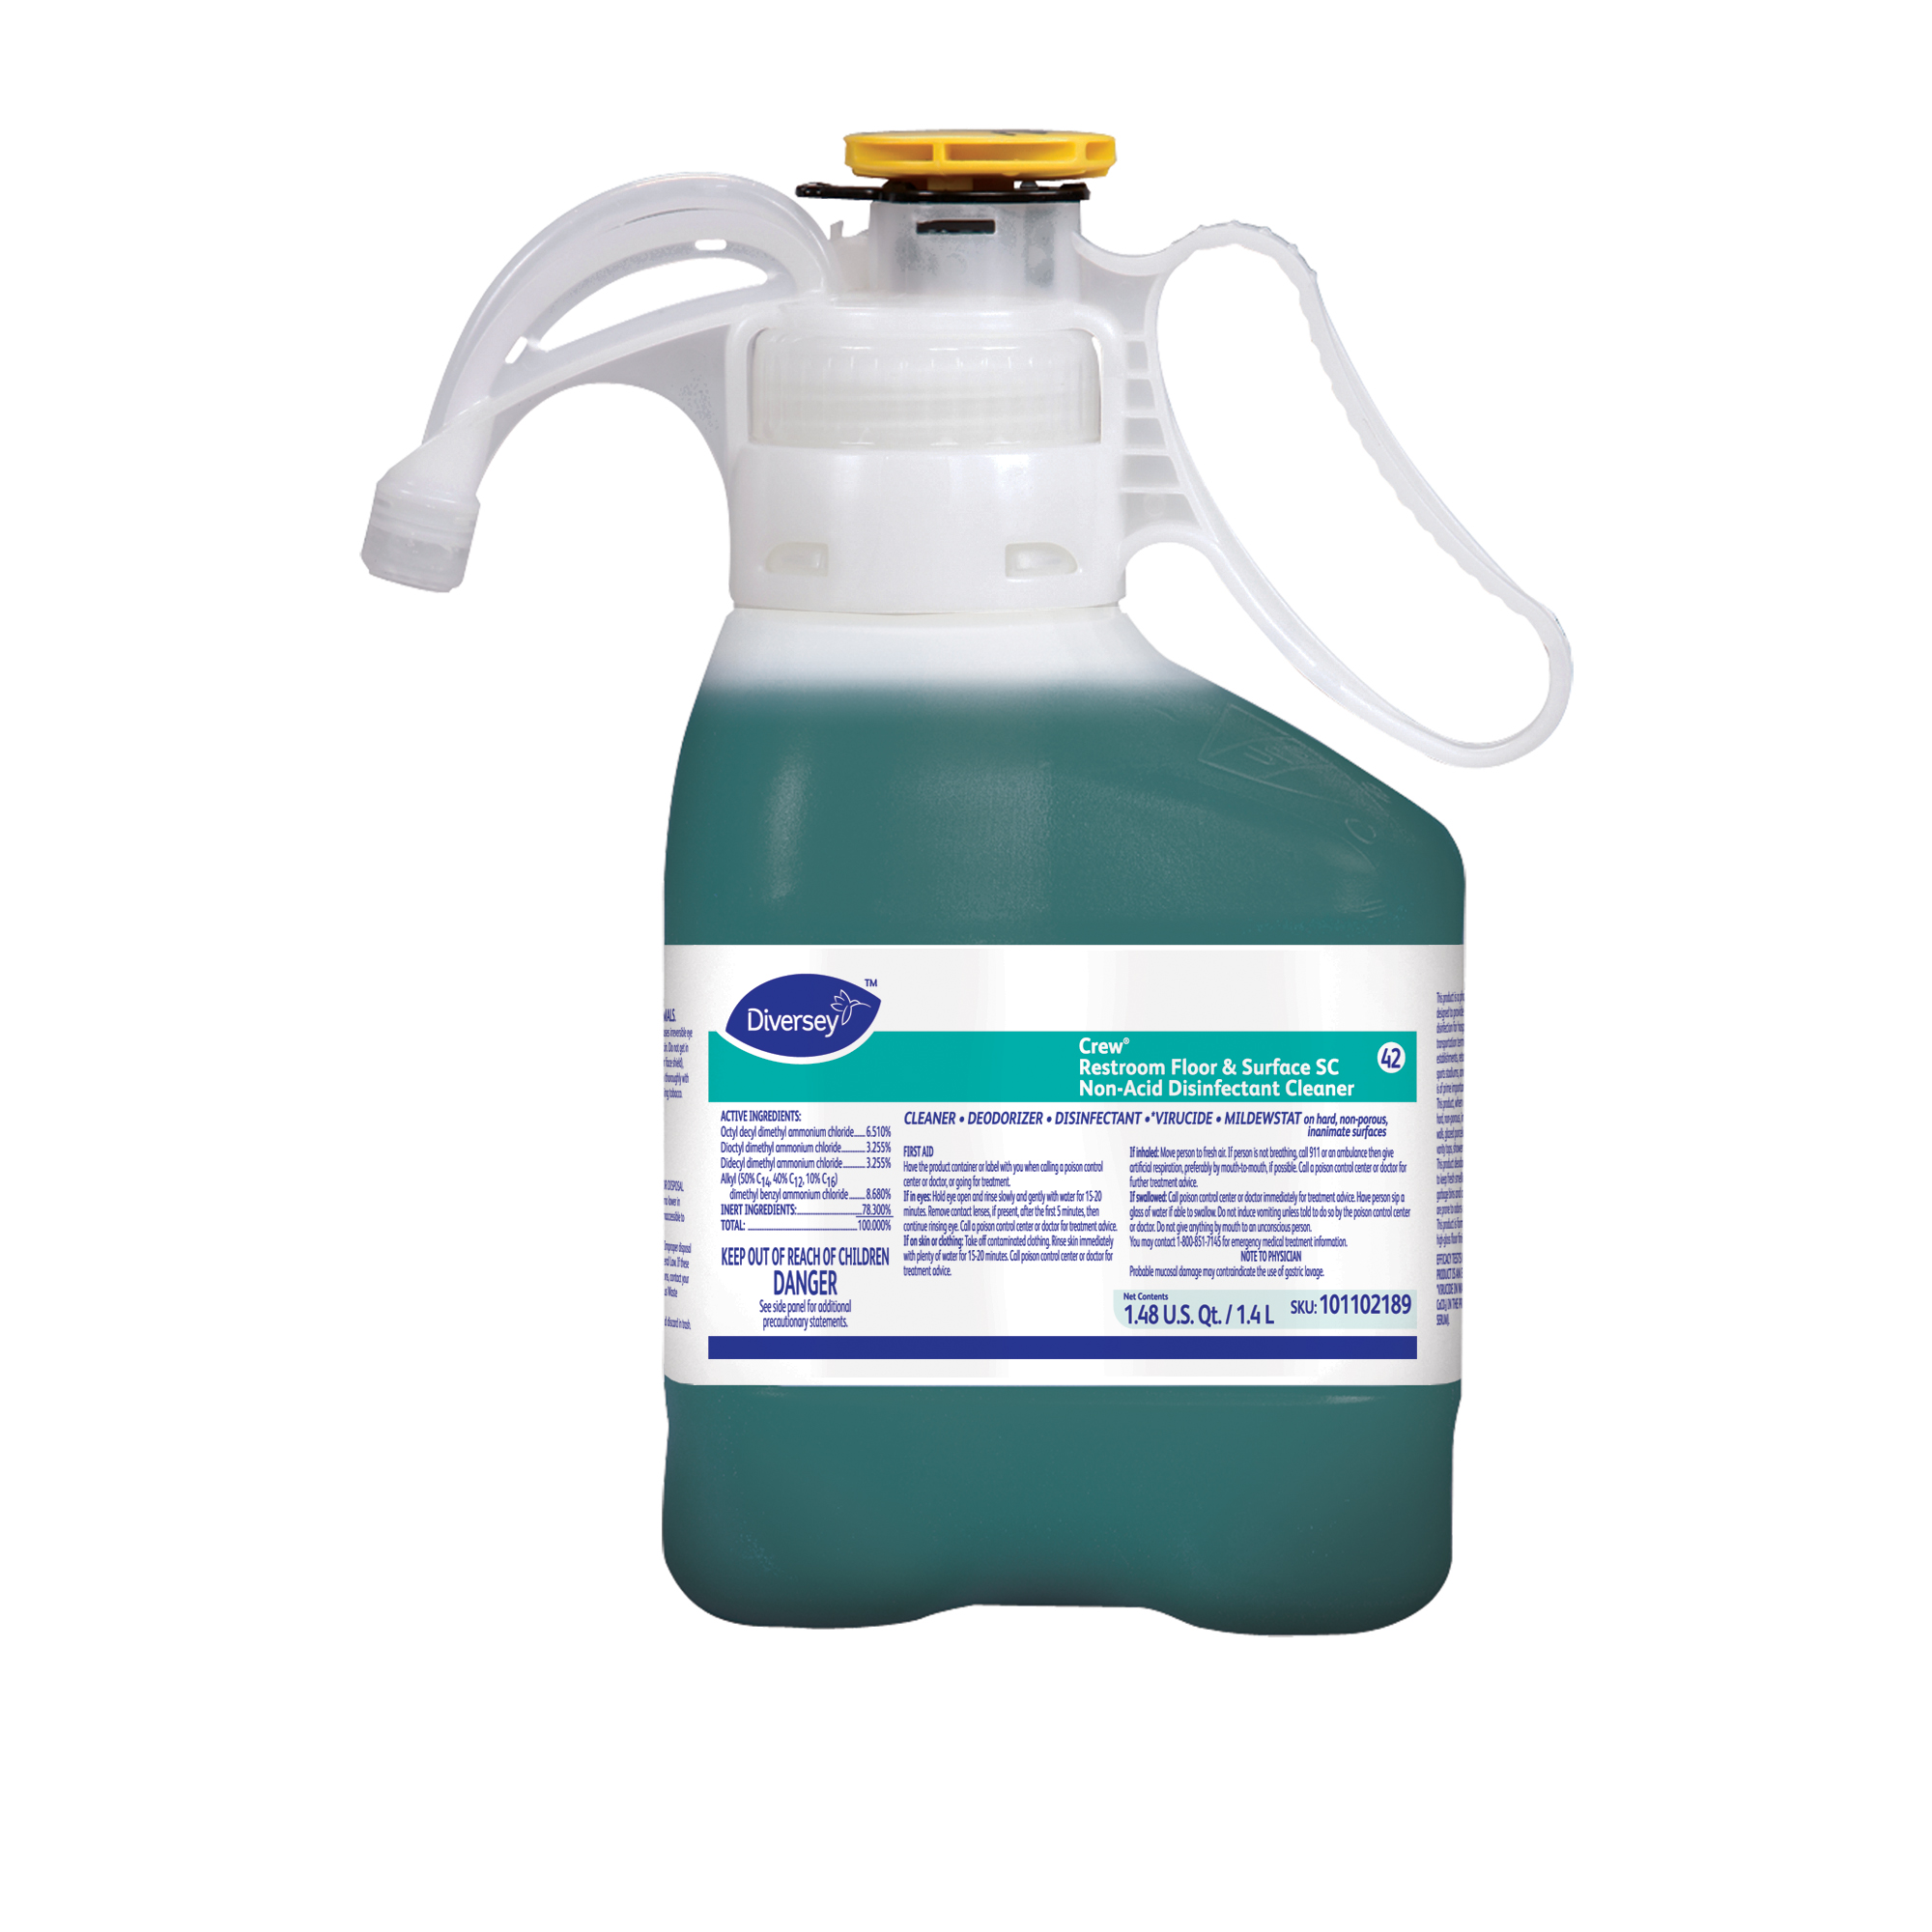 101102189_Crew_Restroom_Floor_and_Surface_SC_Non_Acid_Disinfectant_Cleaner_1x1.4L_Front